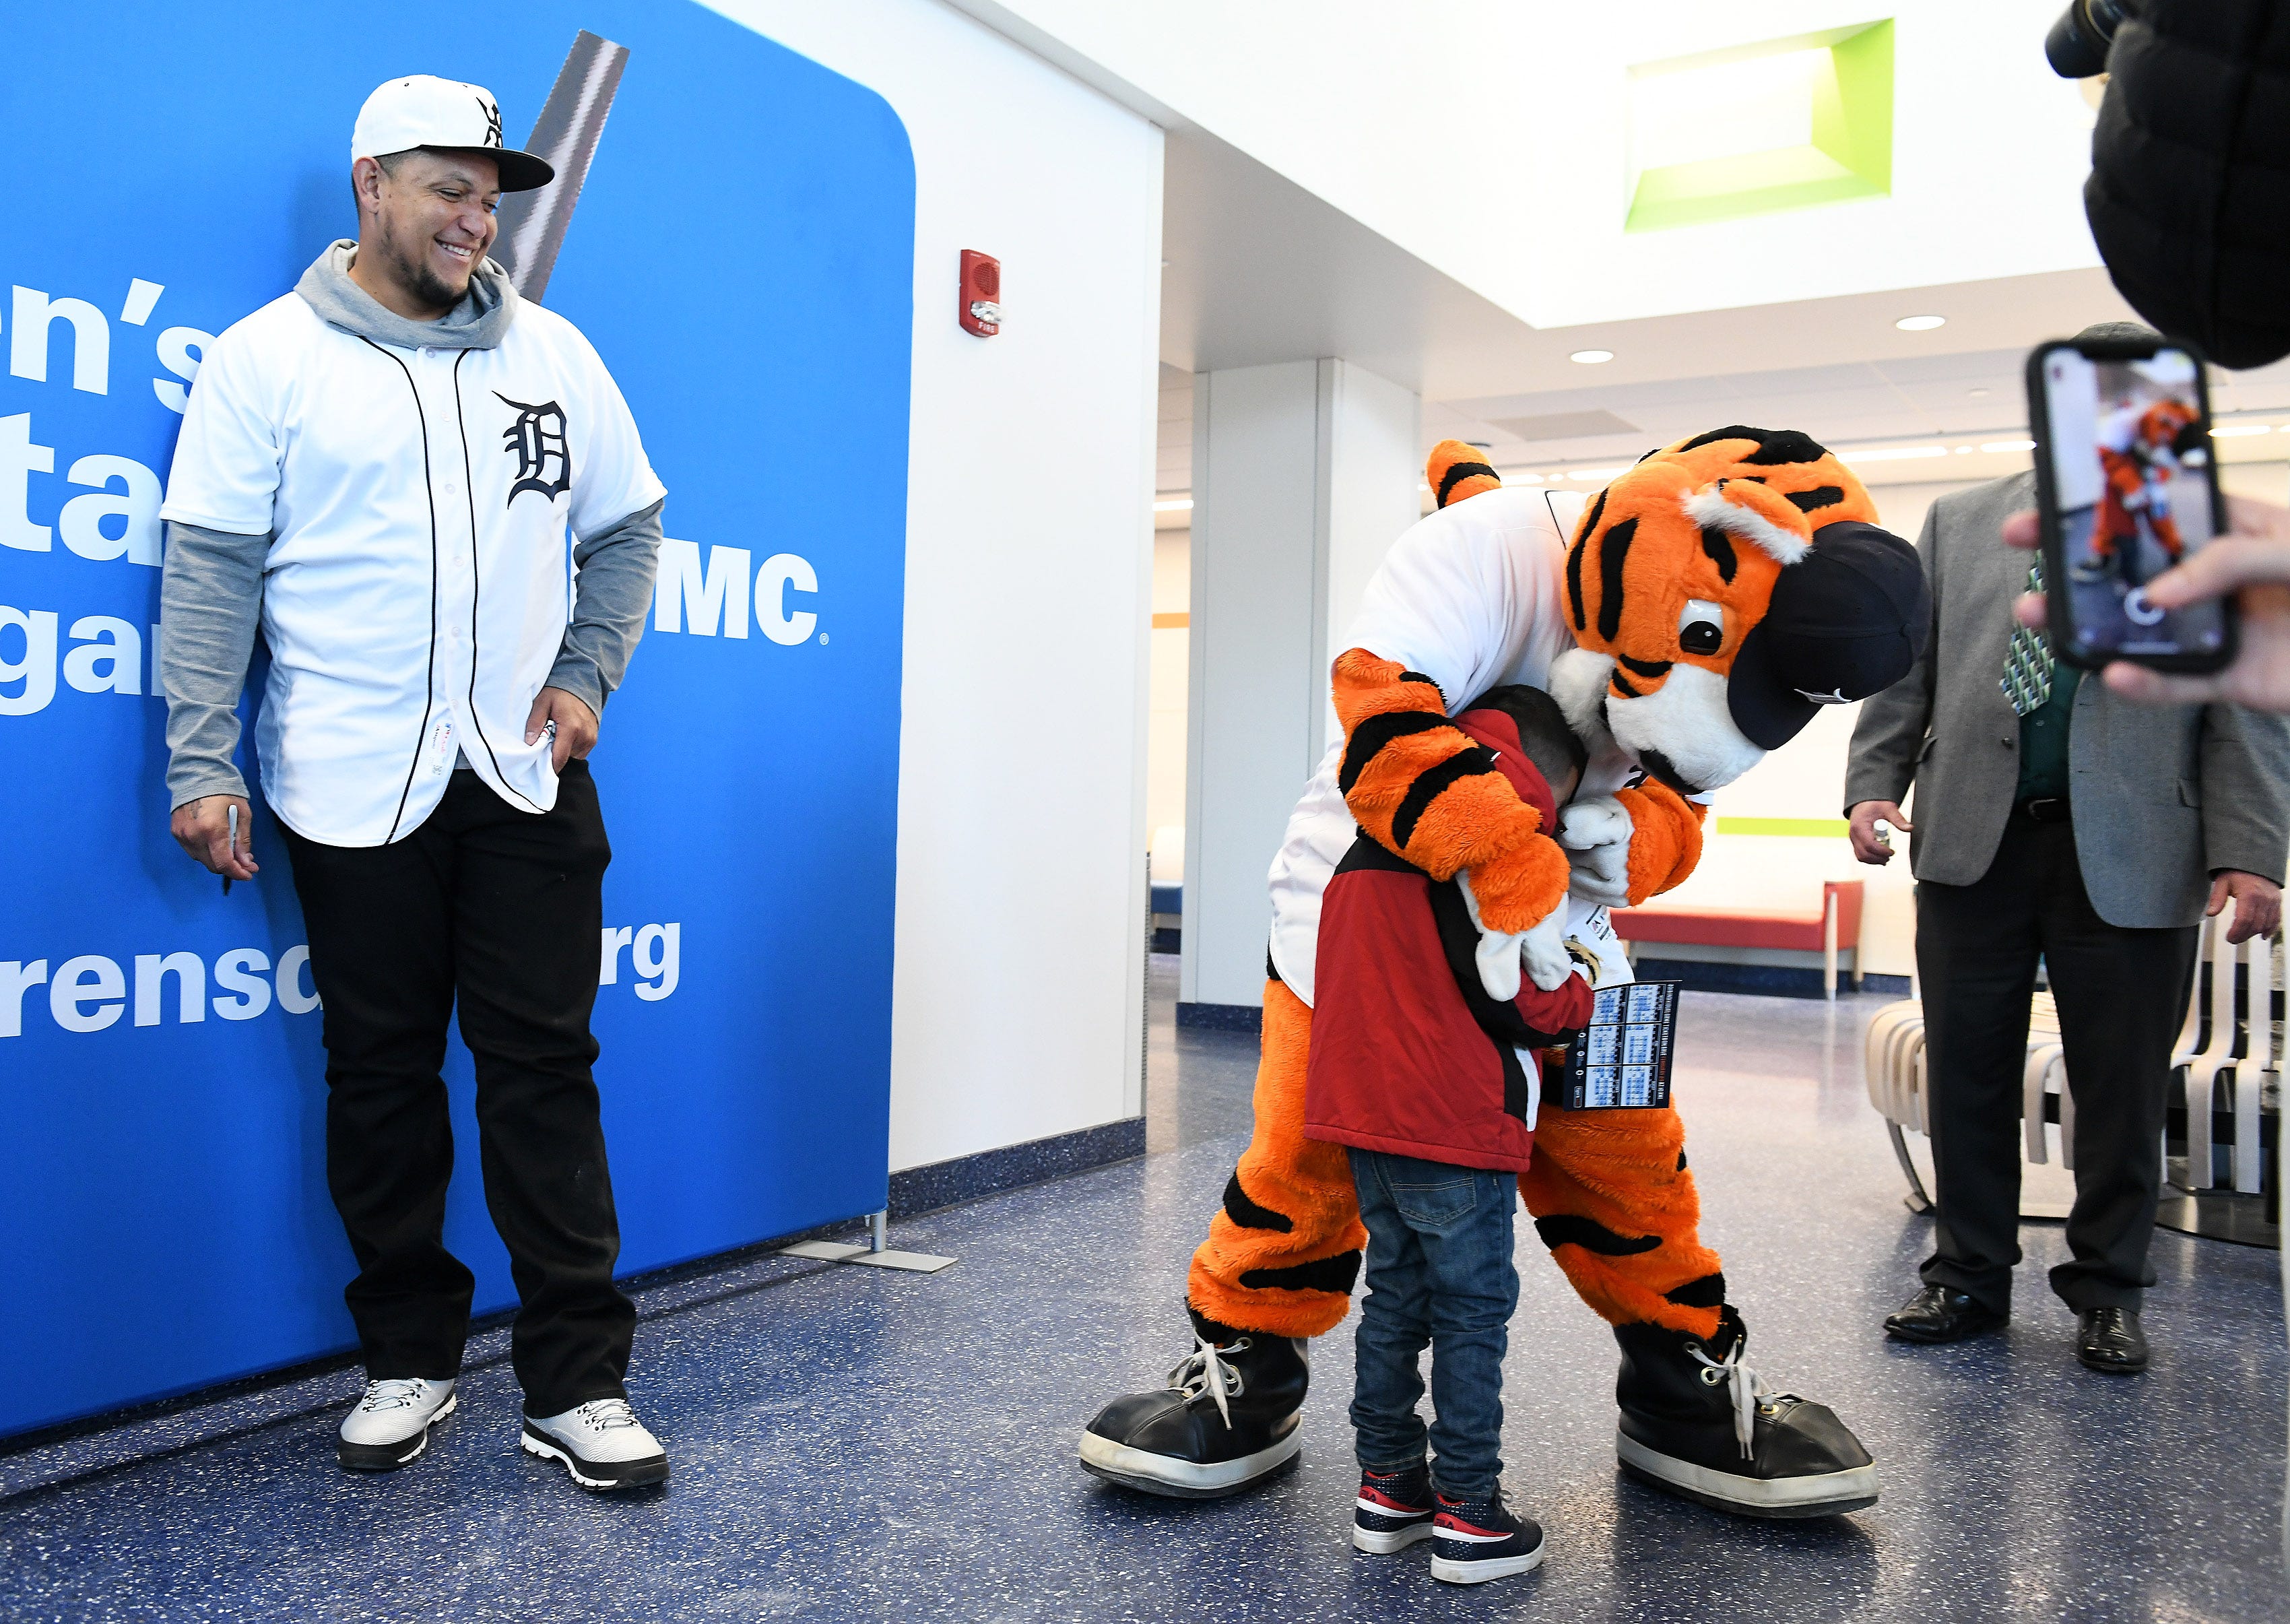 Tigers' Miguel Cabrera, left, laughs as Jesus Plata Gonzalez, 4, of Detroit goes to Paws before him during a stop on the 2019 Detroit Tigers Winter Caravan at the Children's Hospital of Michigan  in Detroit on Jan. 25, 2019.